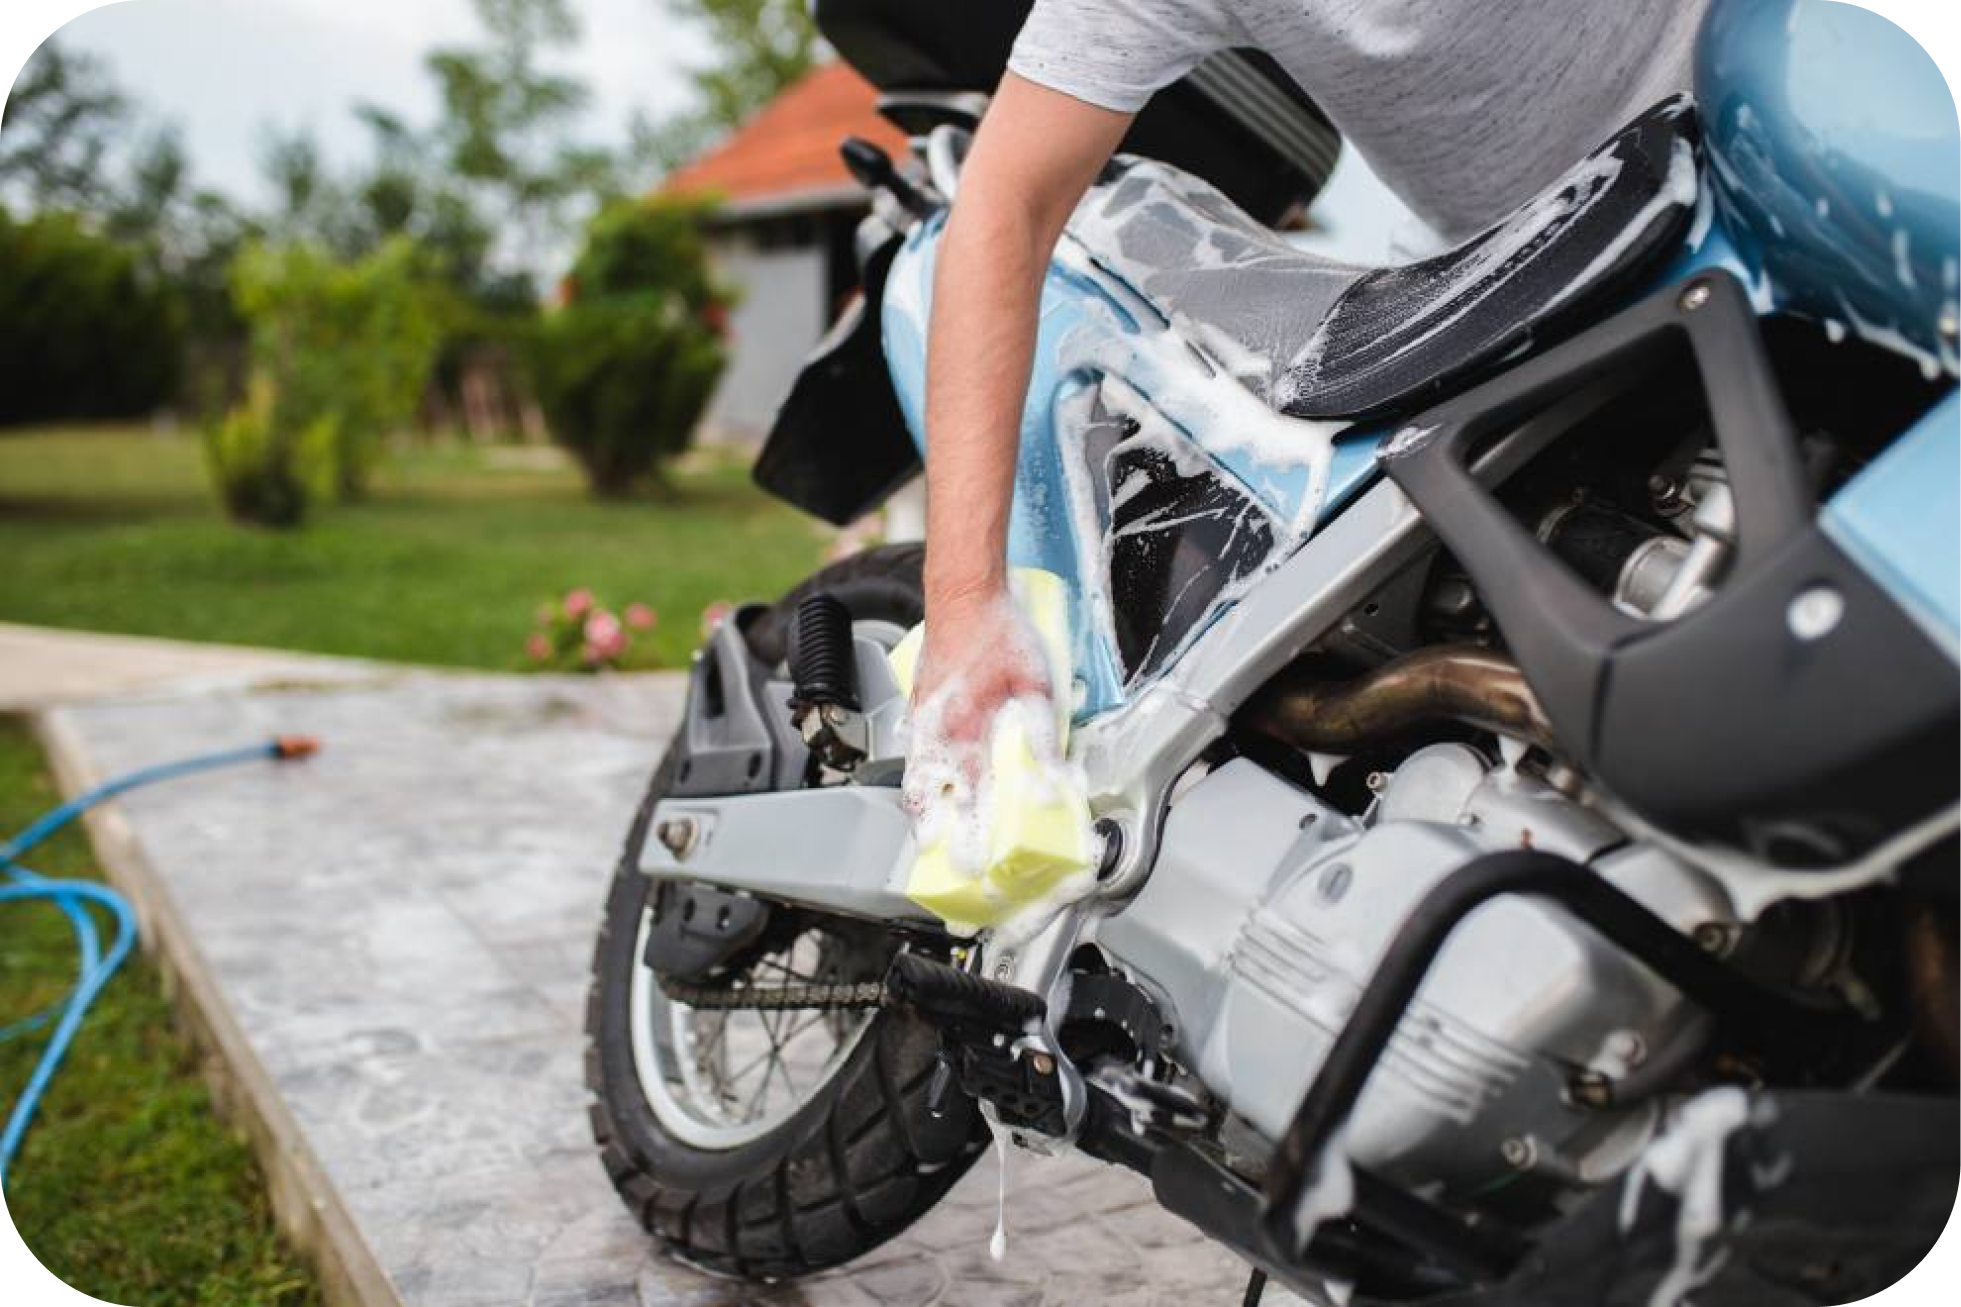 Man cleaning the motorcycle with sponge and soap